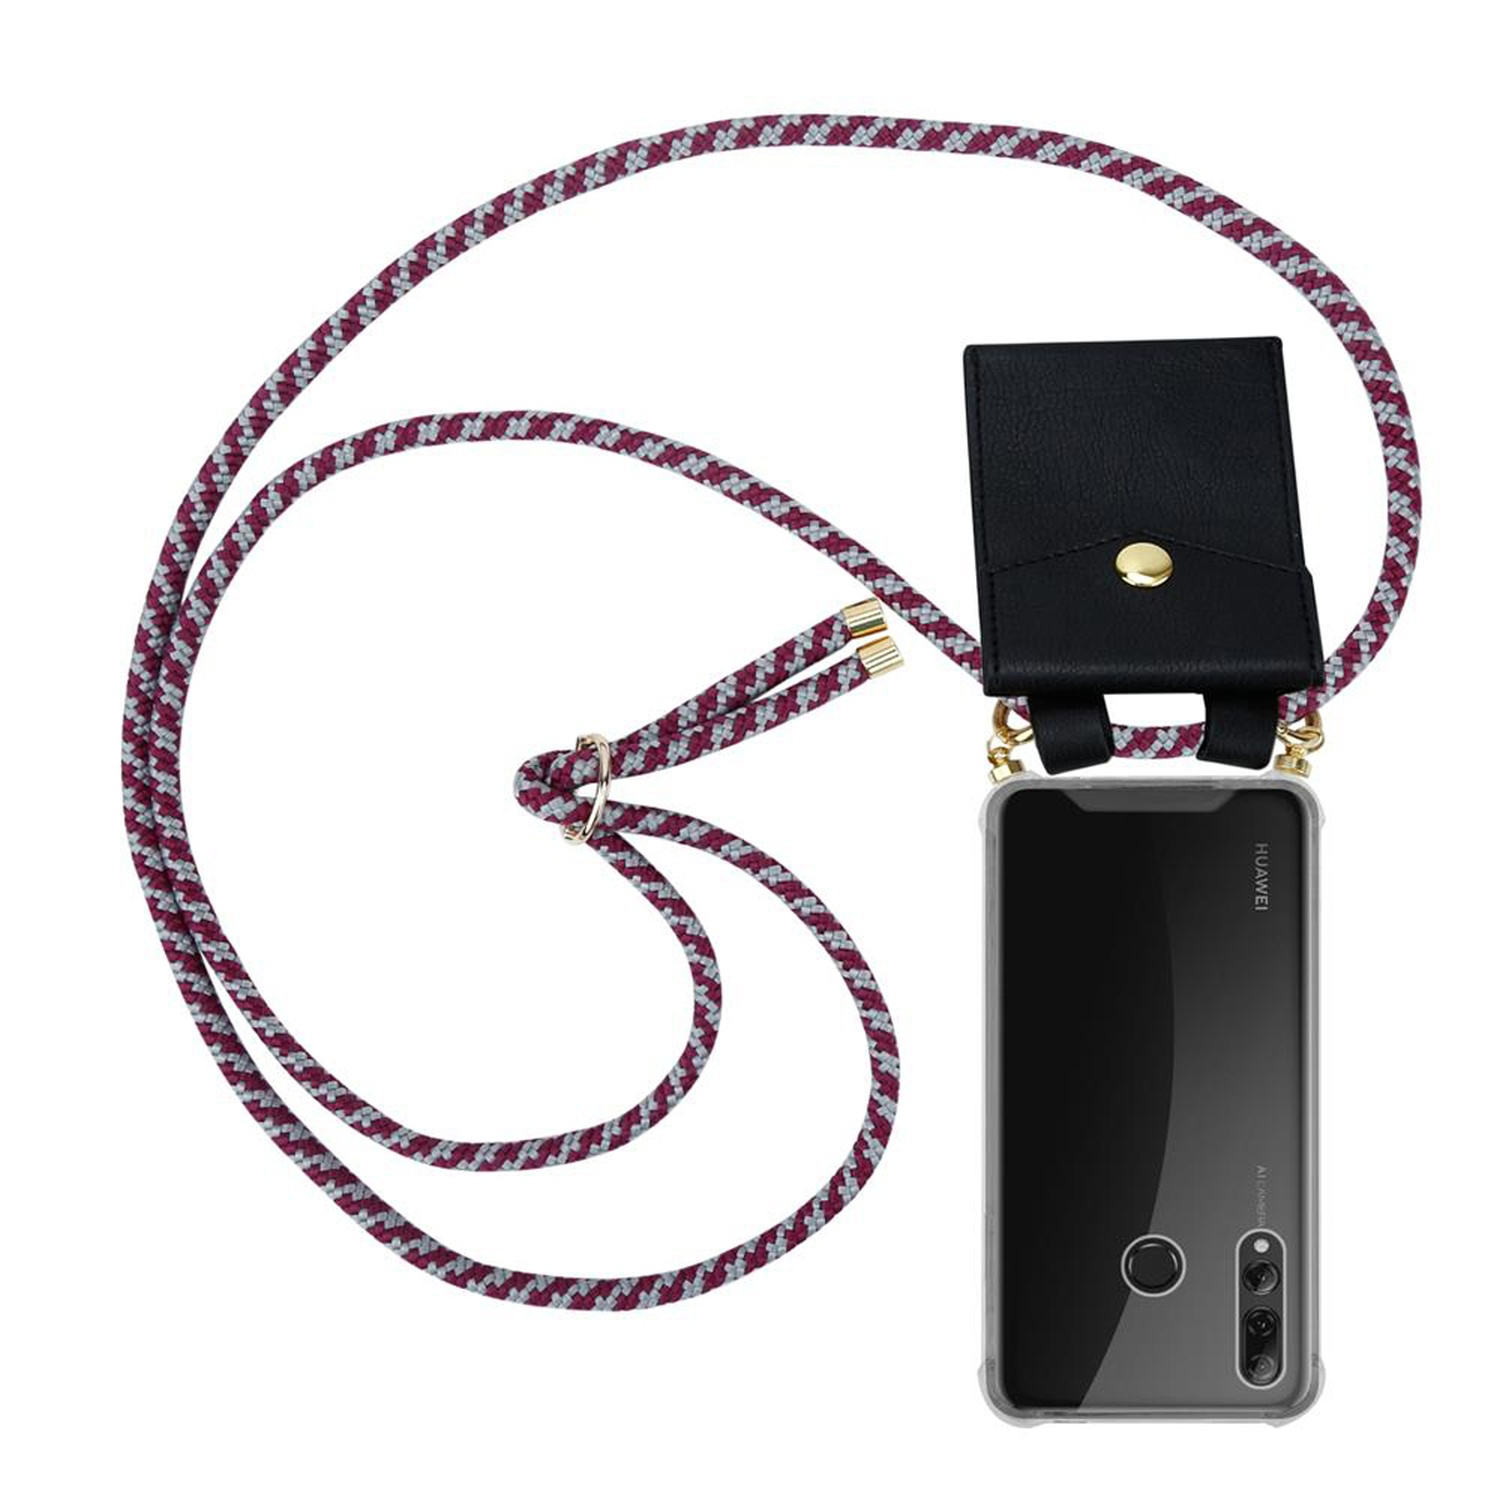 CADORABO Handy Gold Kette P und Hülle, WEIß ROT PLUS Band SMART mit abnehmbarer Huawei, Kordel 2019, Backcover, Ringen